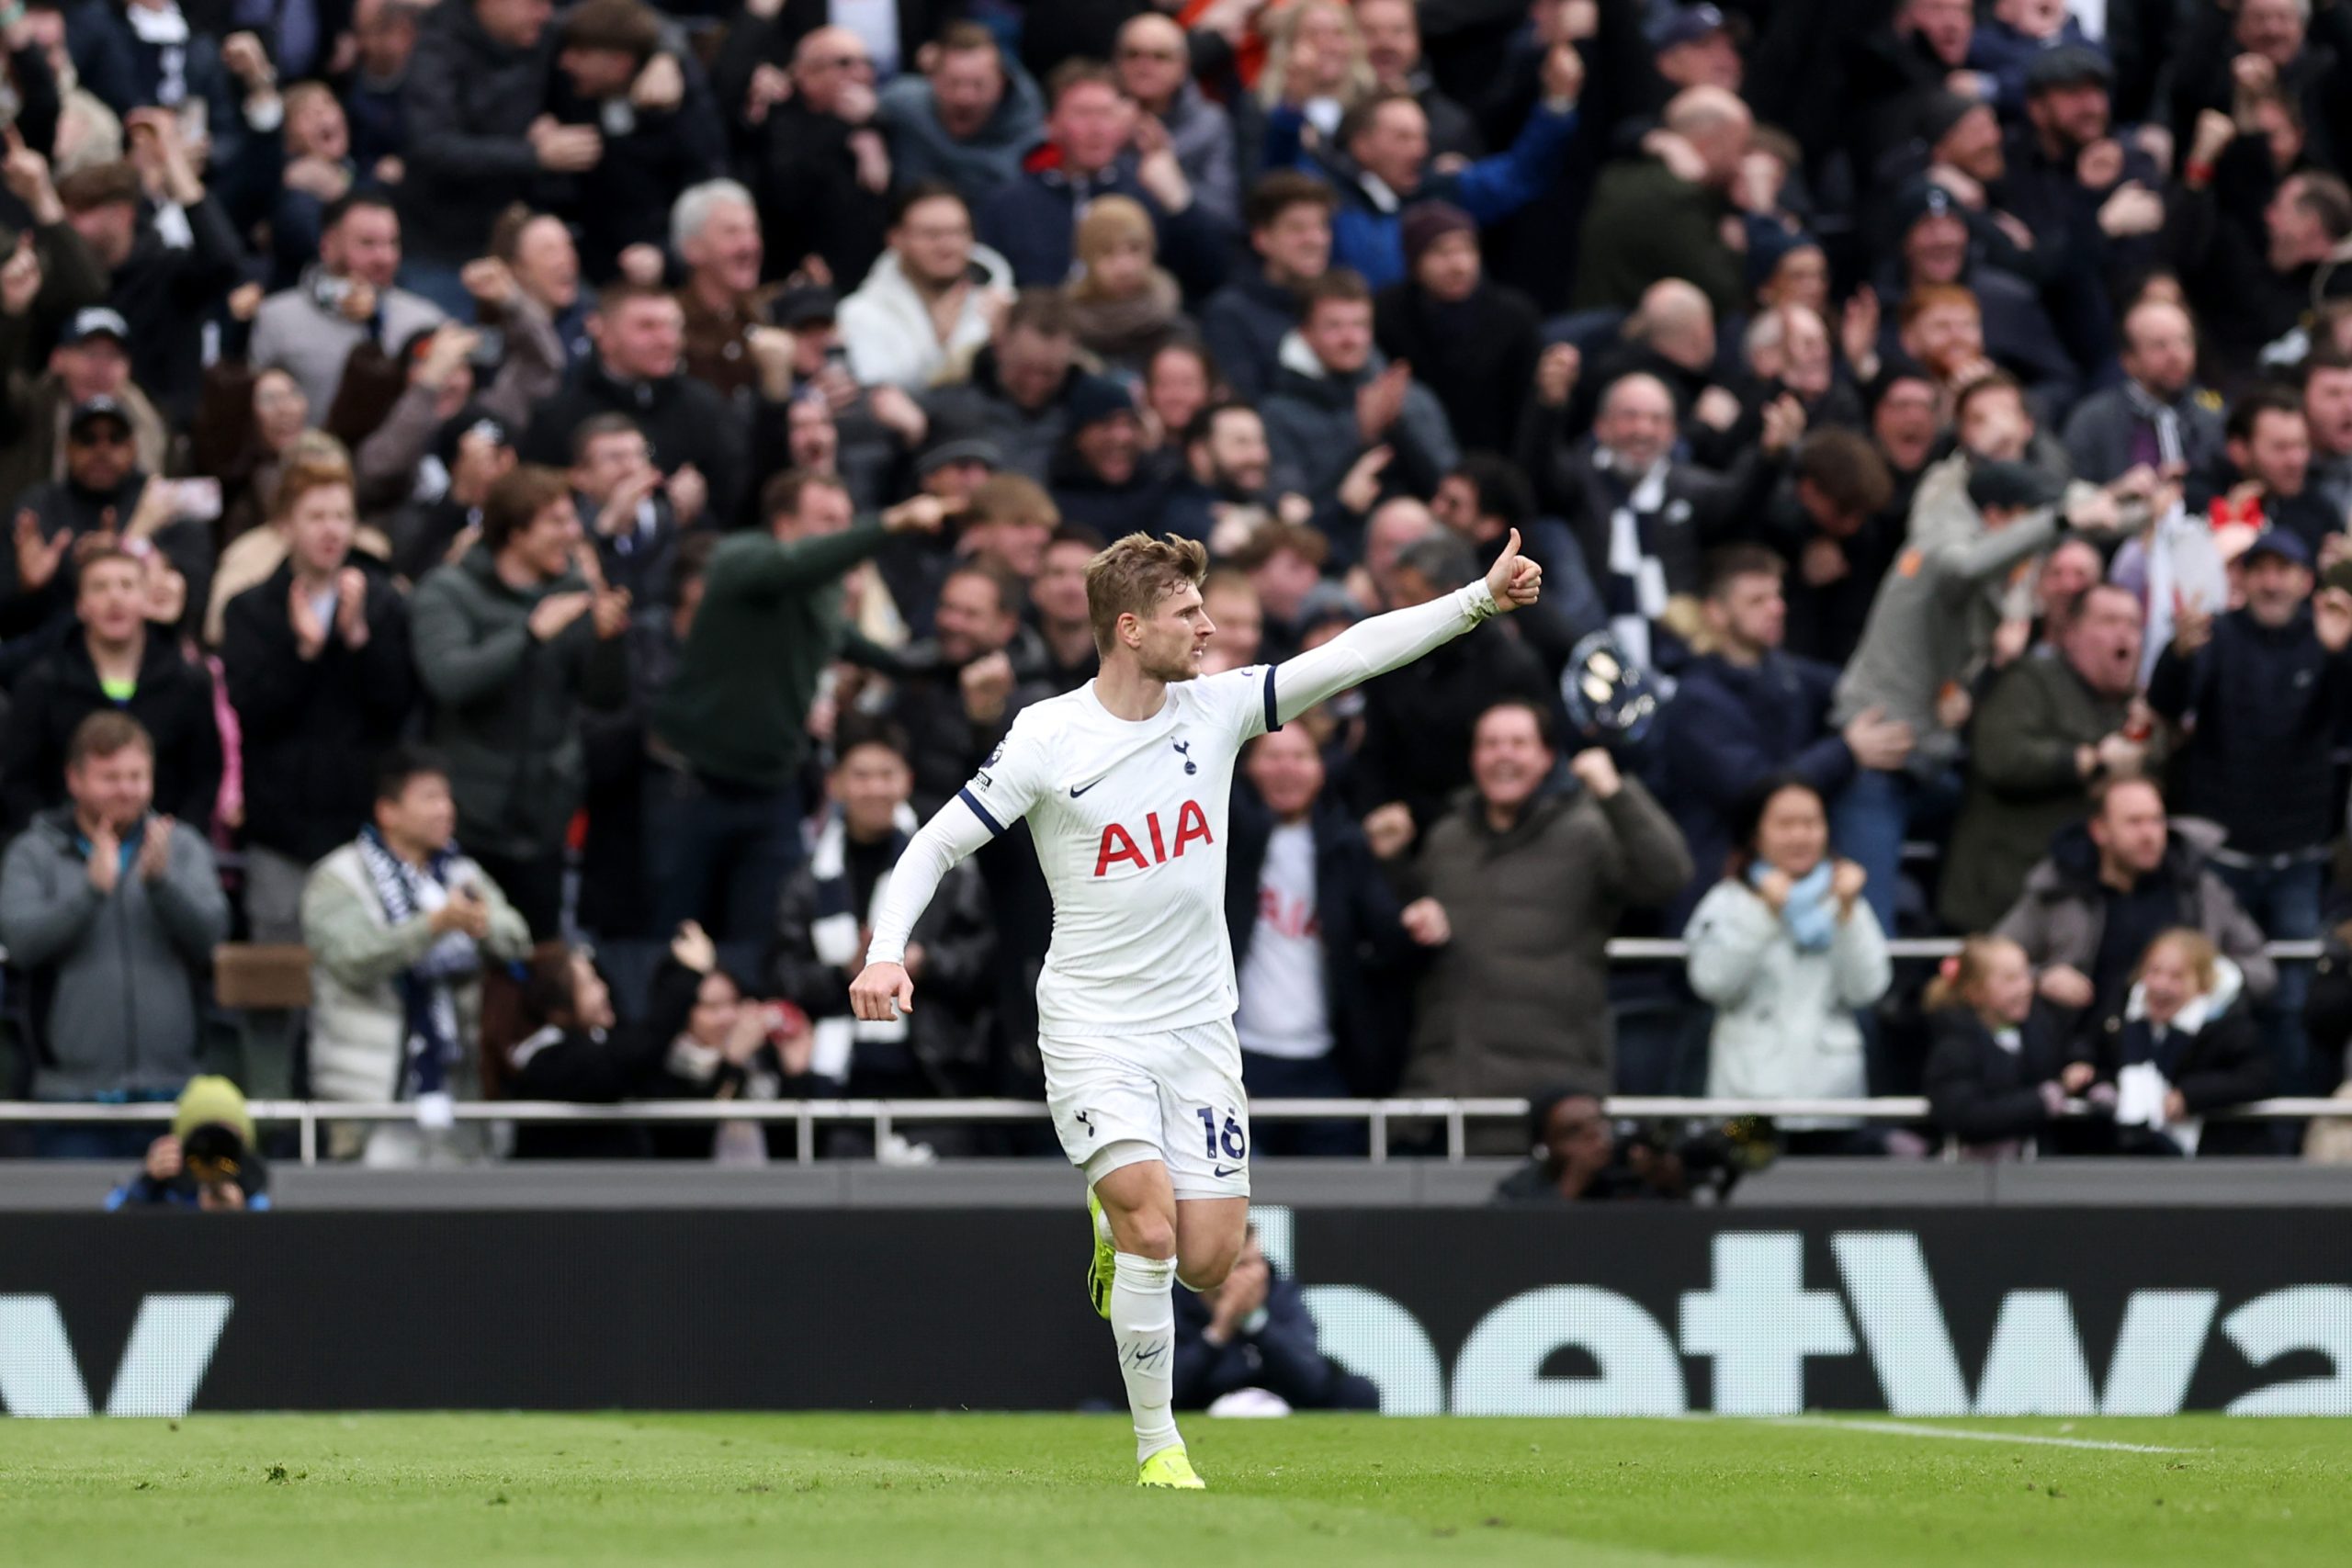 Florian Plettenberg sheds light on the future of Timo Werner at Tottenham Hotspur